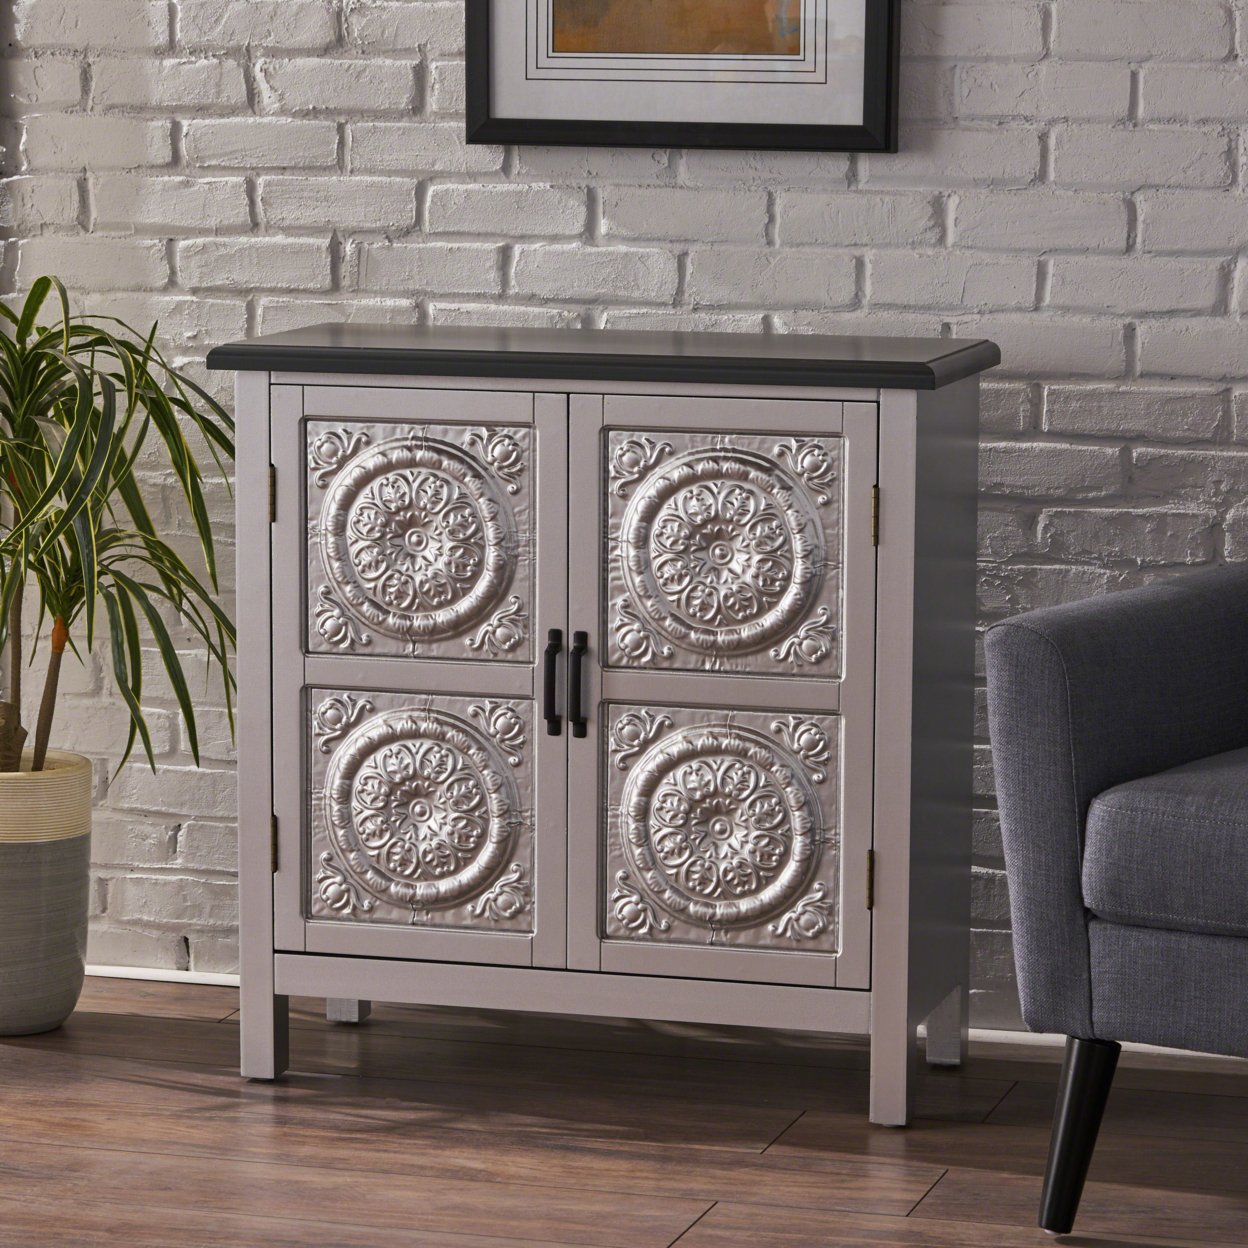 Aliana Finished Firwood Cabinet With Faux Wood Overlay And Accented Top - Silver/Charcoal Gray